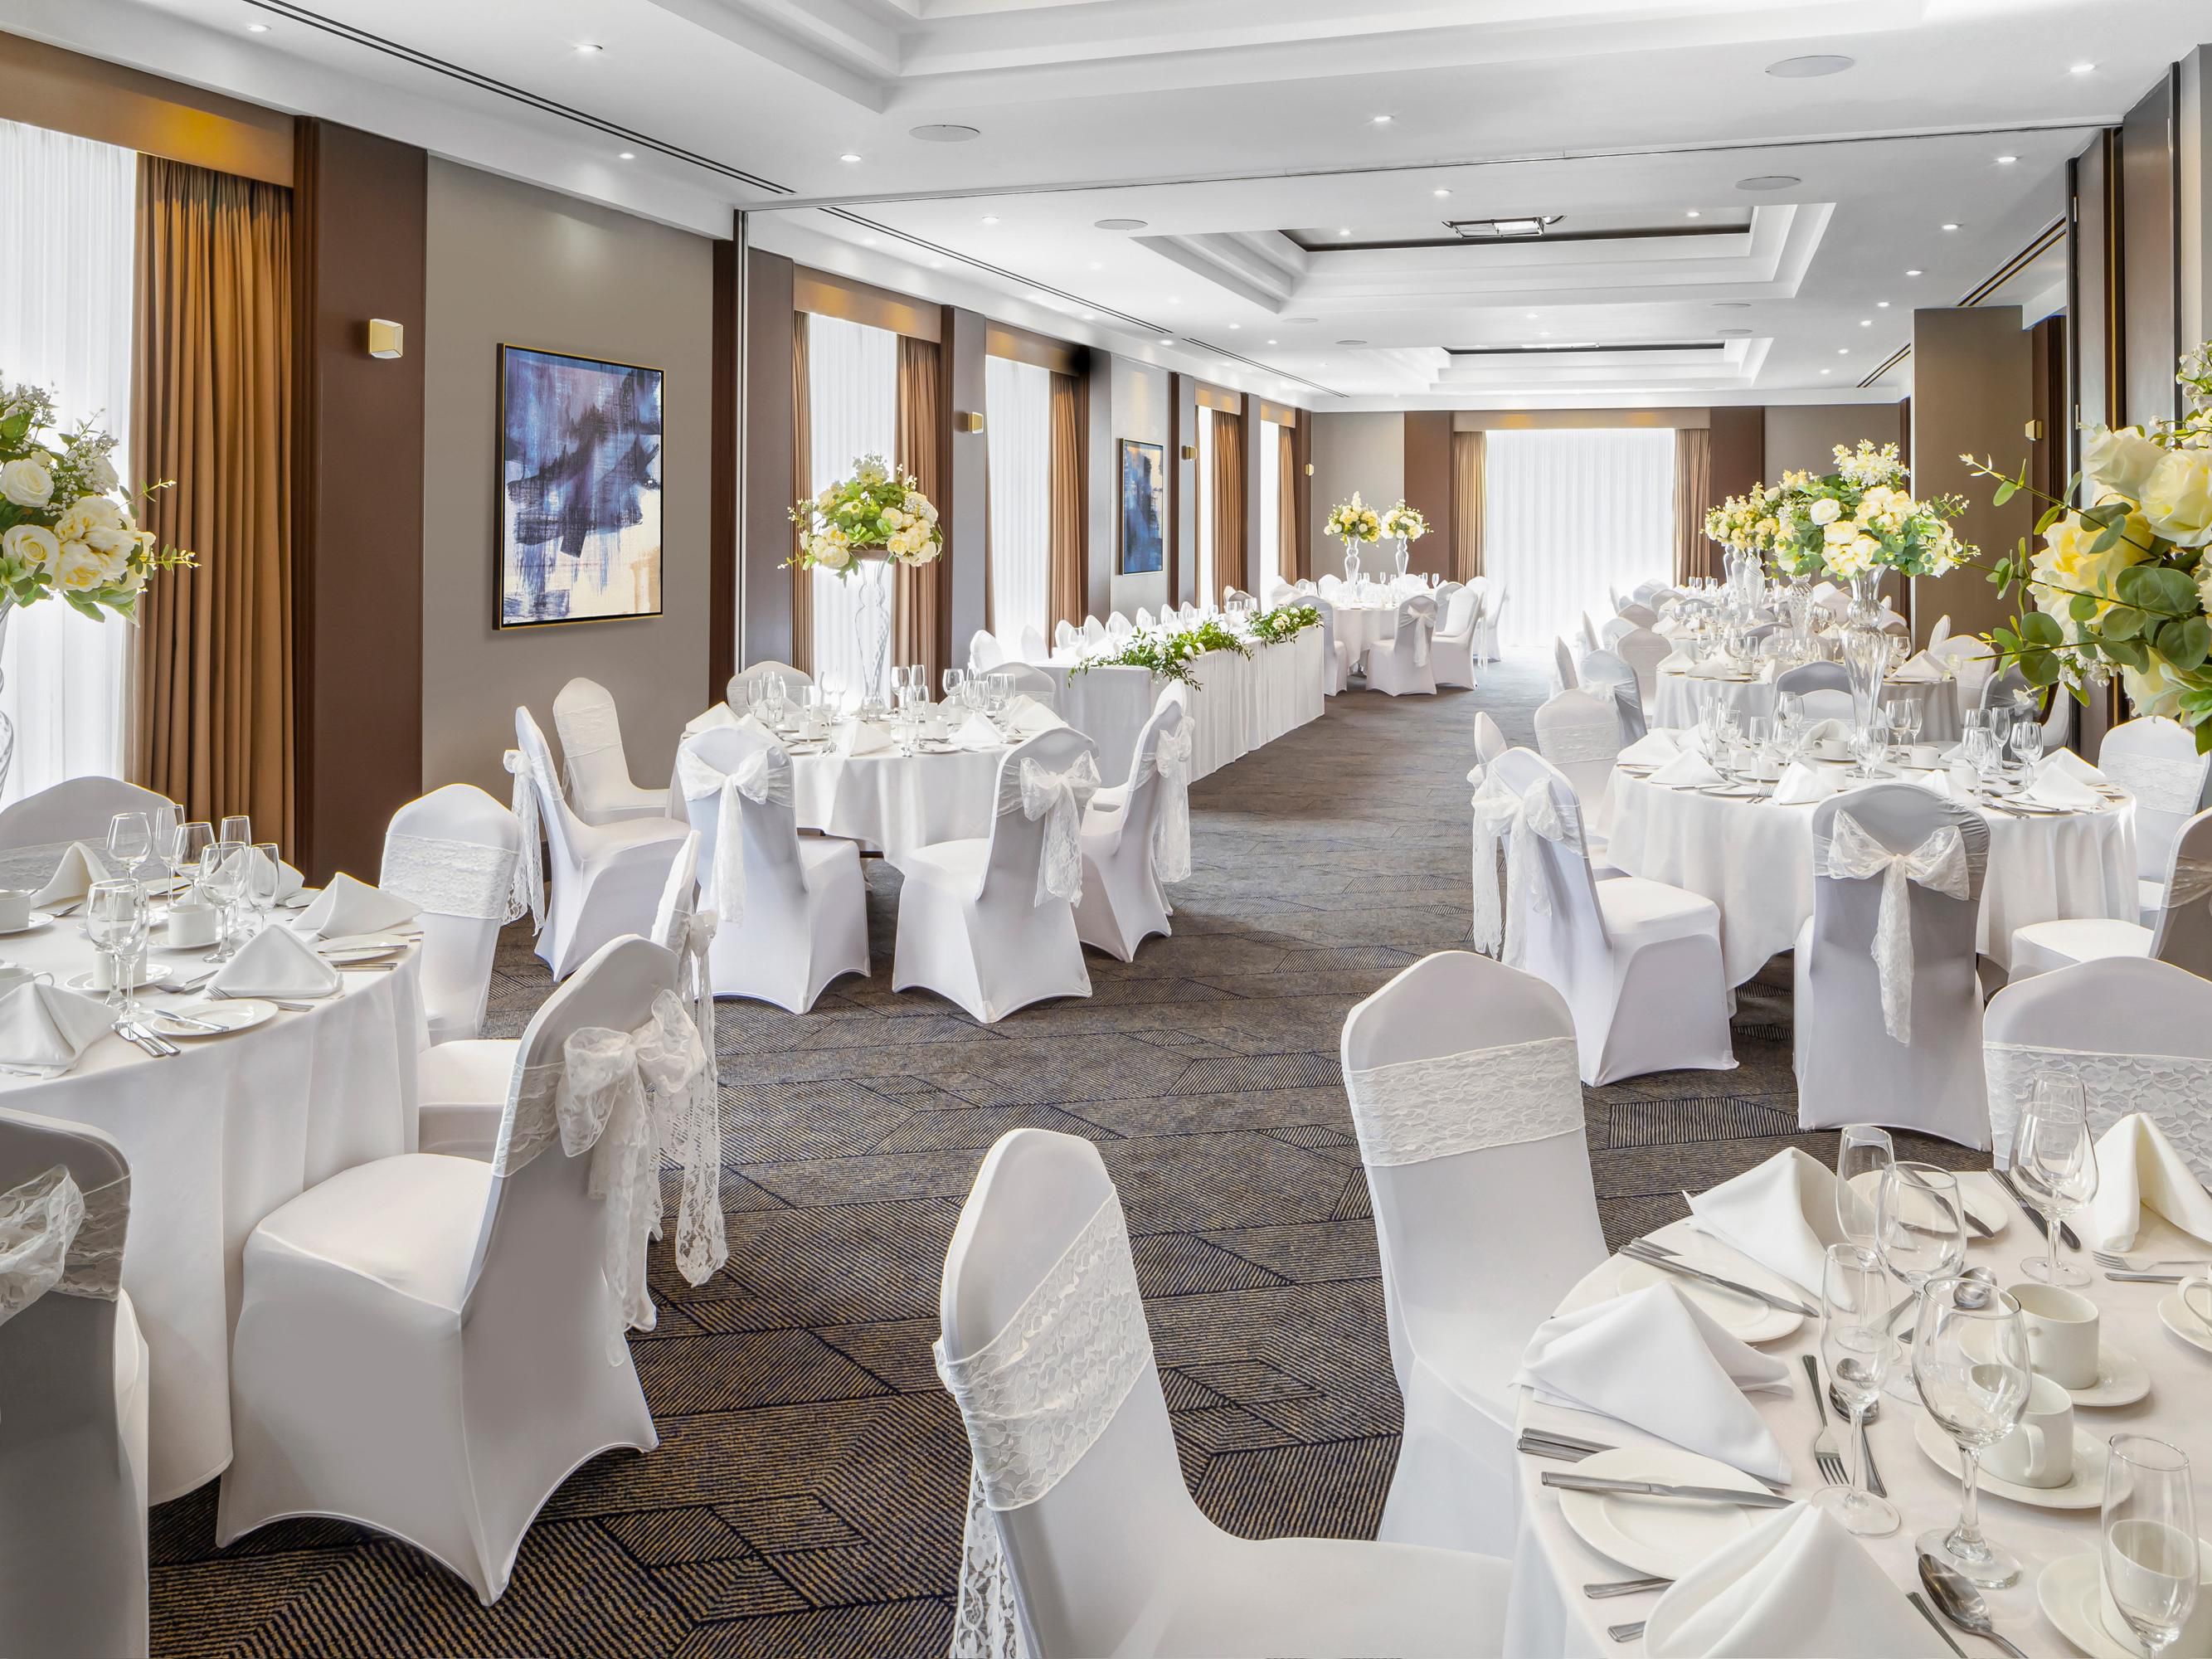 Set within picturesque grounds, the Crowne Plaza Solihull has everything you need for your perfect wedding day. From a small intimate gathering to a large wedding breakfast, you can relax in the knowledge that everything will be tailored to suit you and that nothing is too much trouble for our dedicated team. 